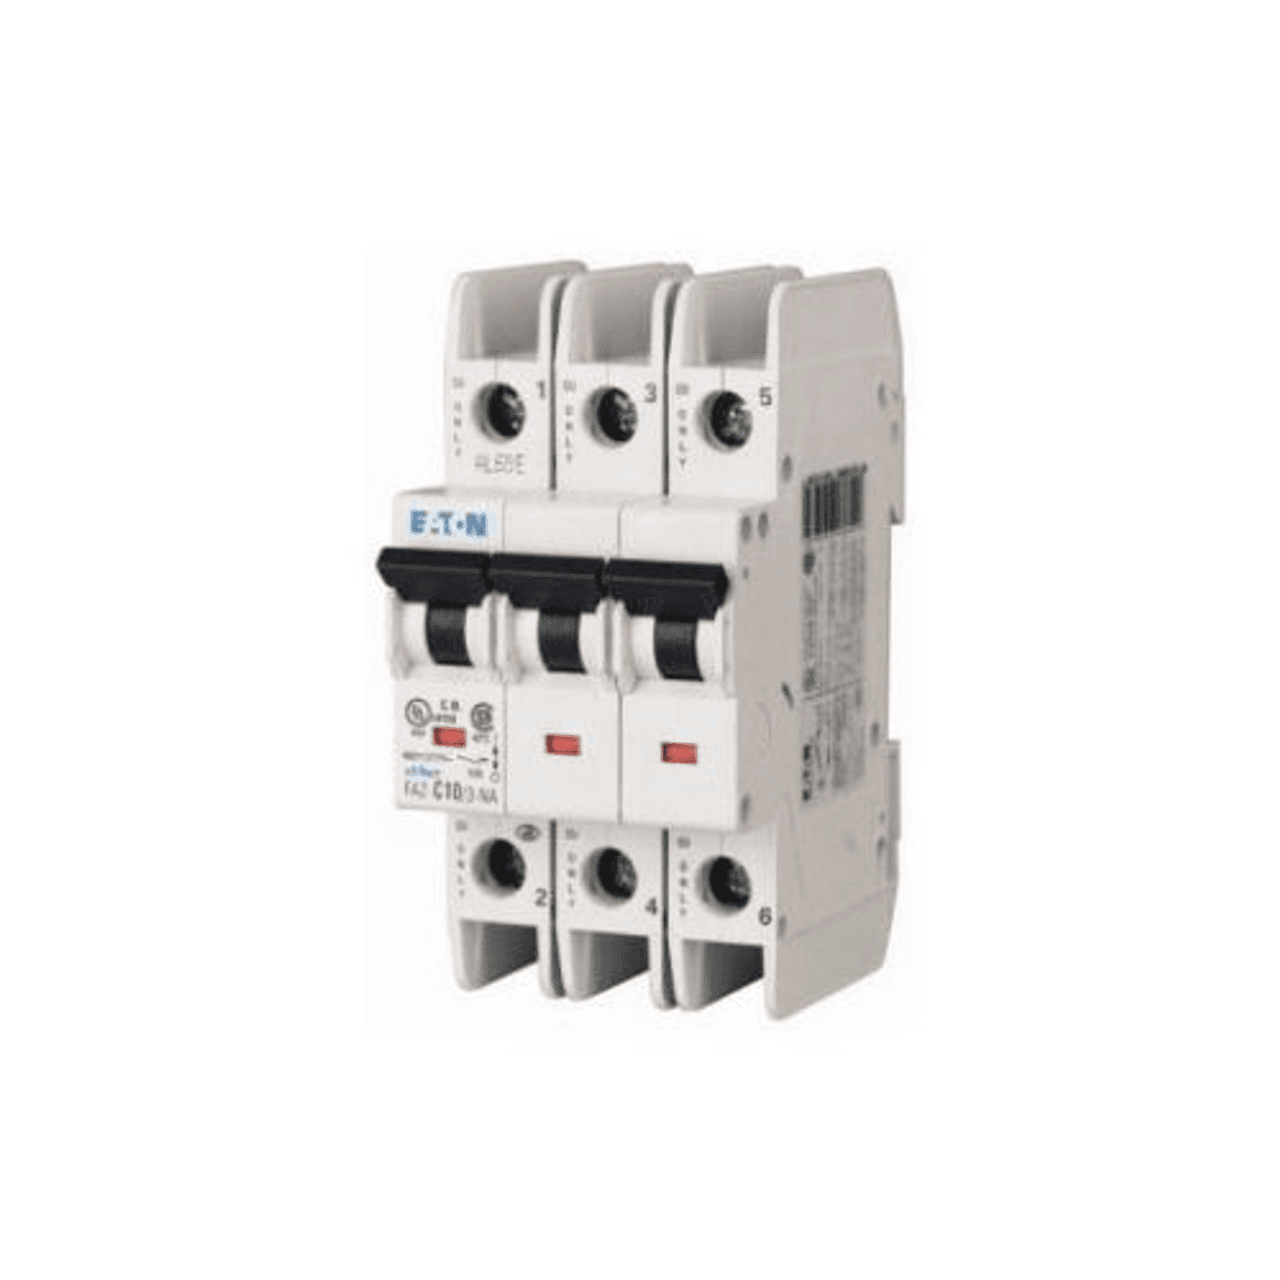 Eaton FAZ-D6/3-NA 277/480 VAC 50/60 Hz, 6 A, 3-Pole, 10/14 kA, 10 to 20 x Rated Current, Screw Terminal, DIN Rail Mount, Standard Packaging, D-Curve, Current Limiting, Thermal Magnetic